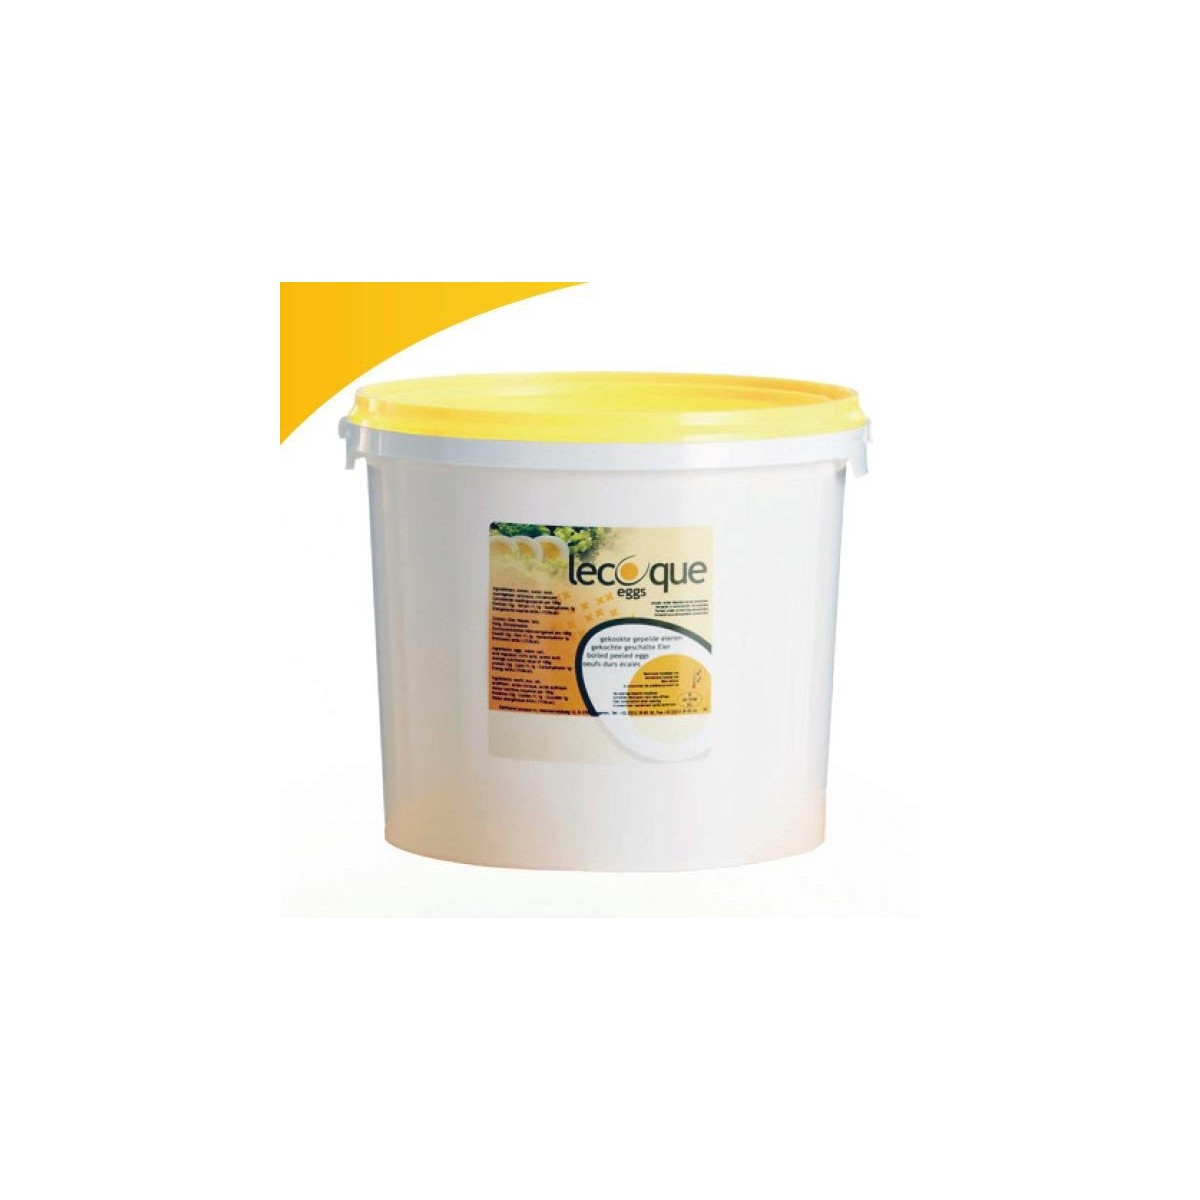 UNSHELLED HARD-BOILED EGGS 75 PIECES LECOQUE  BUCKET